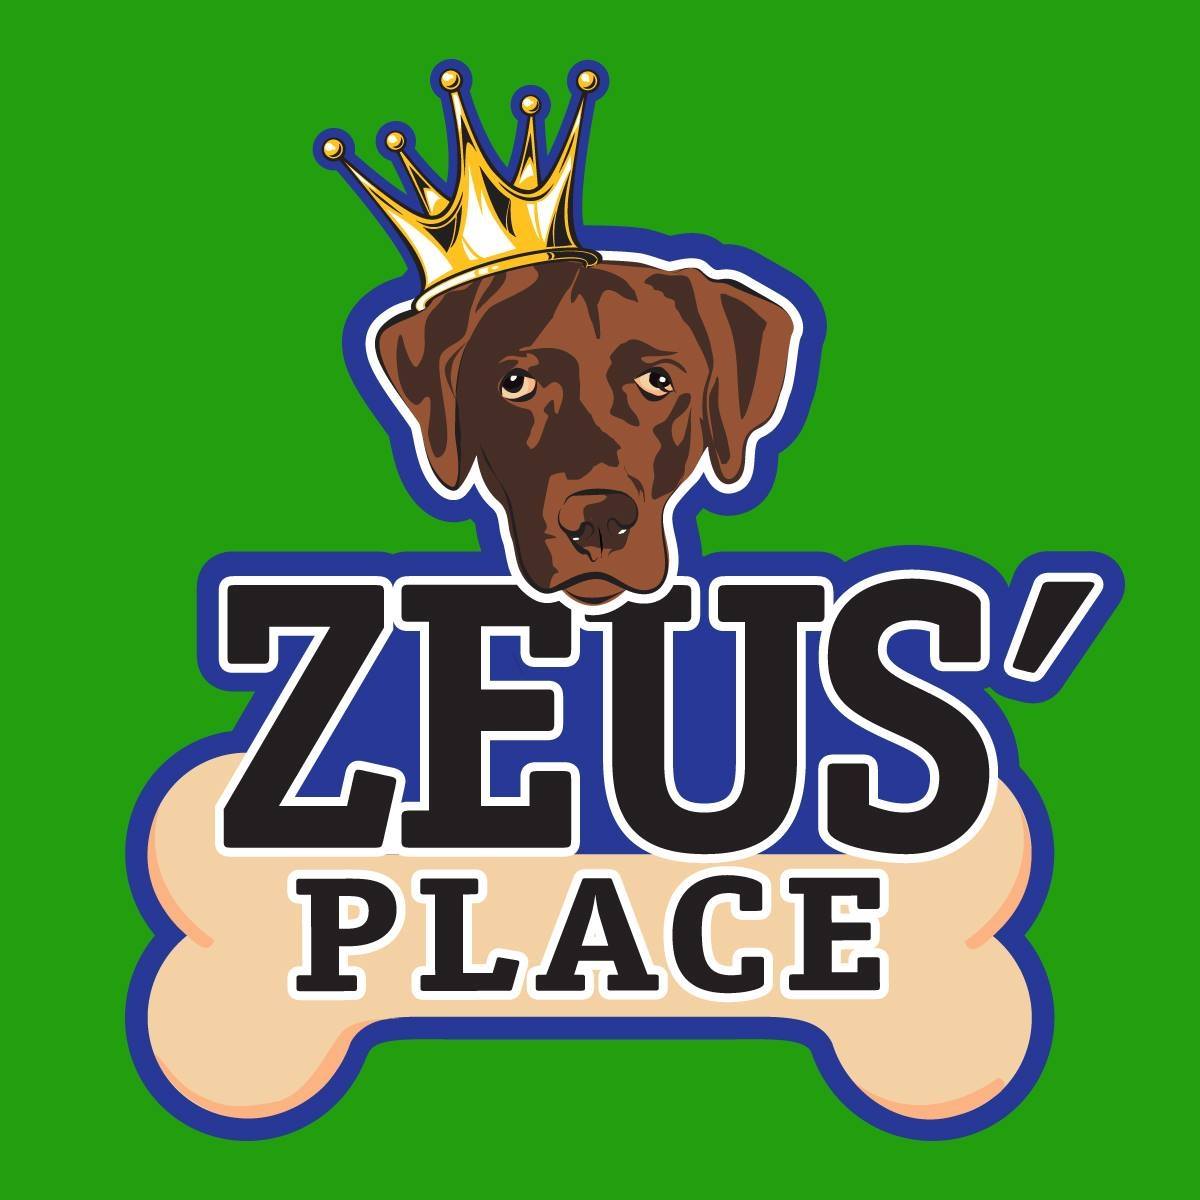 Company logo of Zeus’ Place Downtown